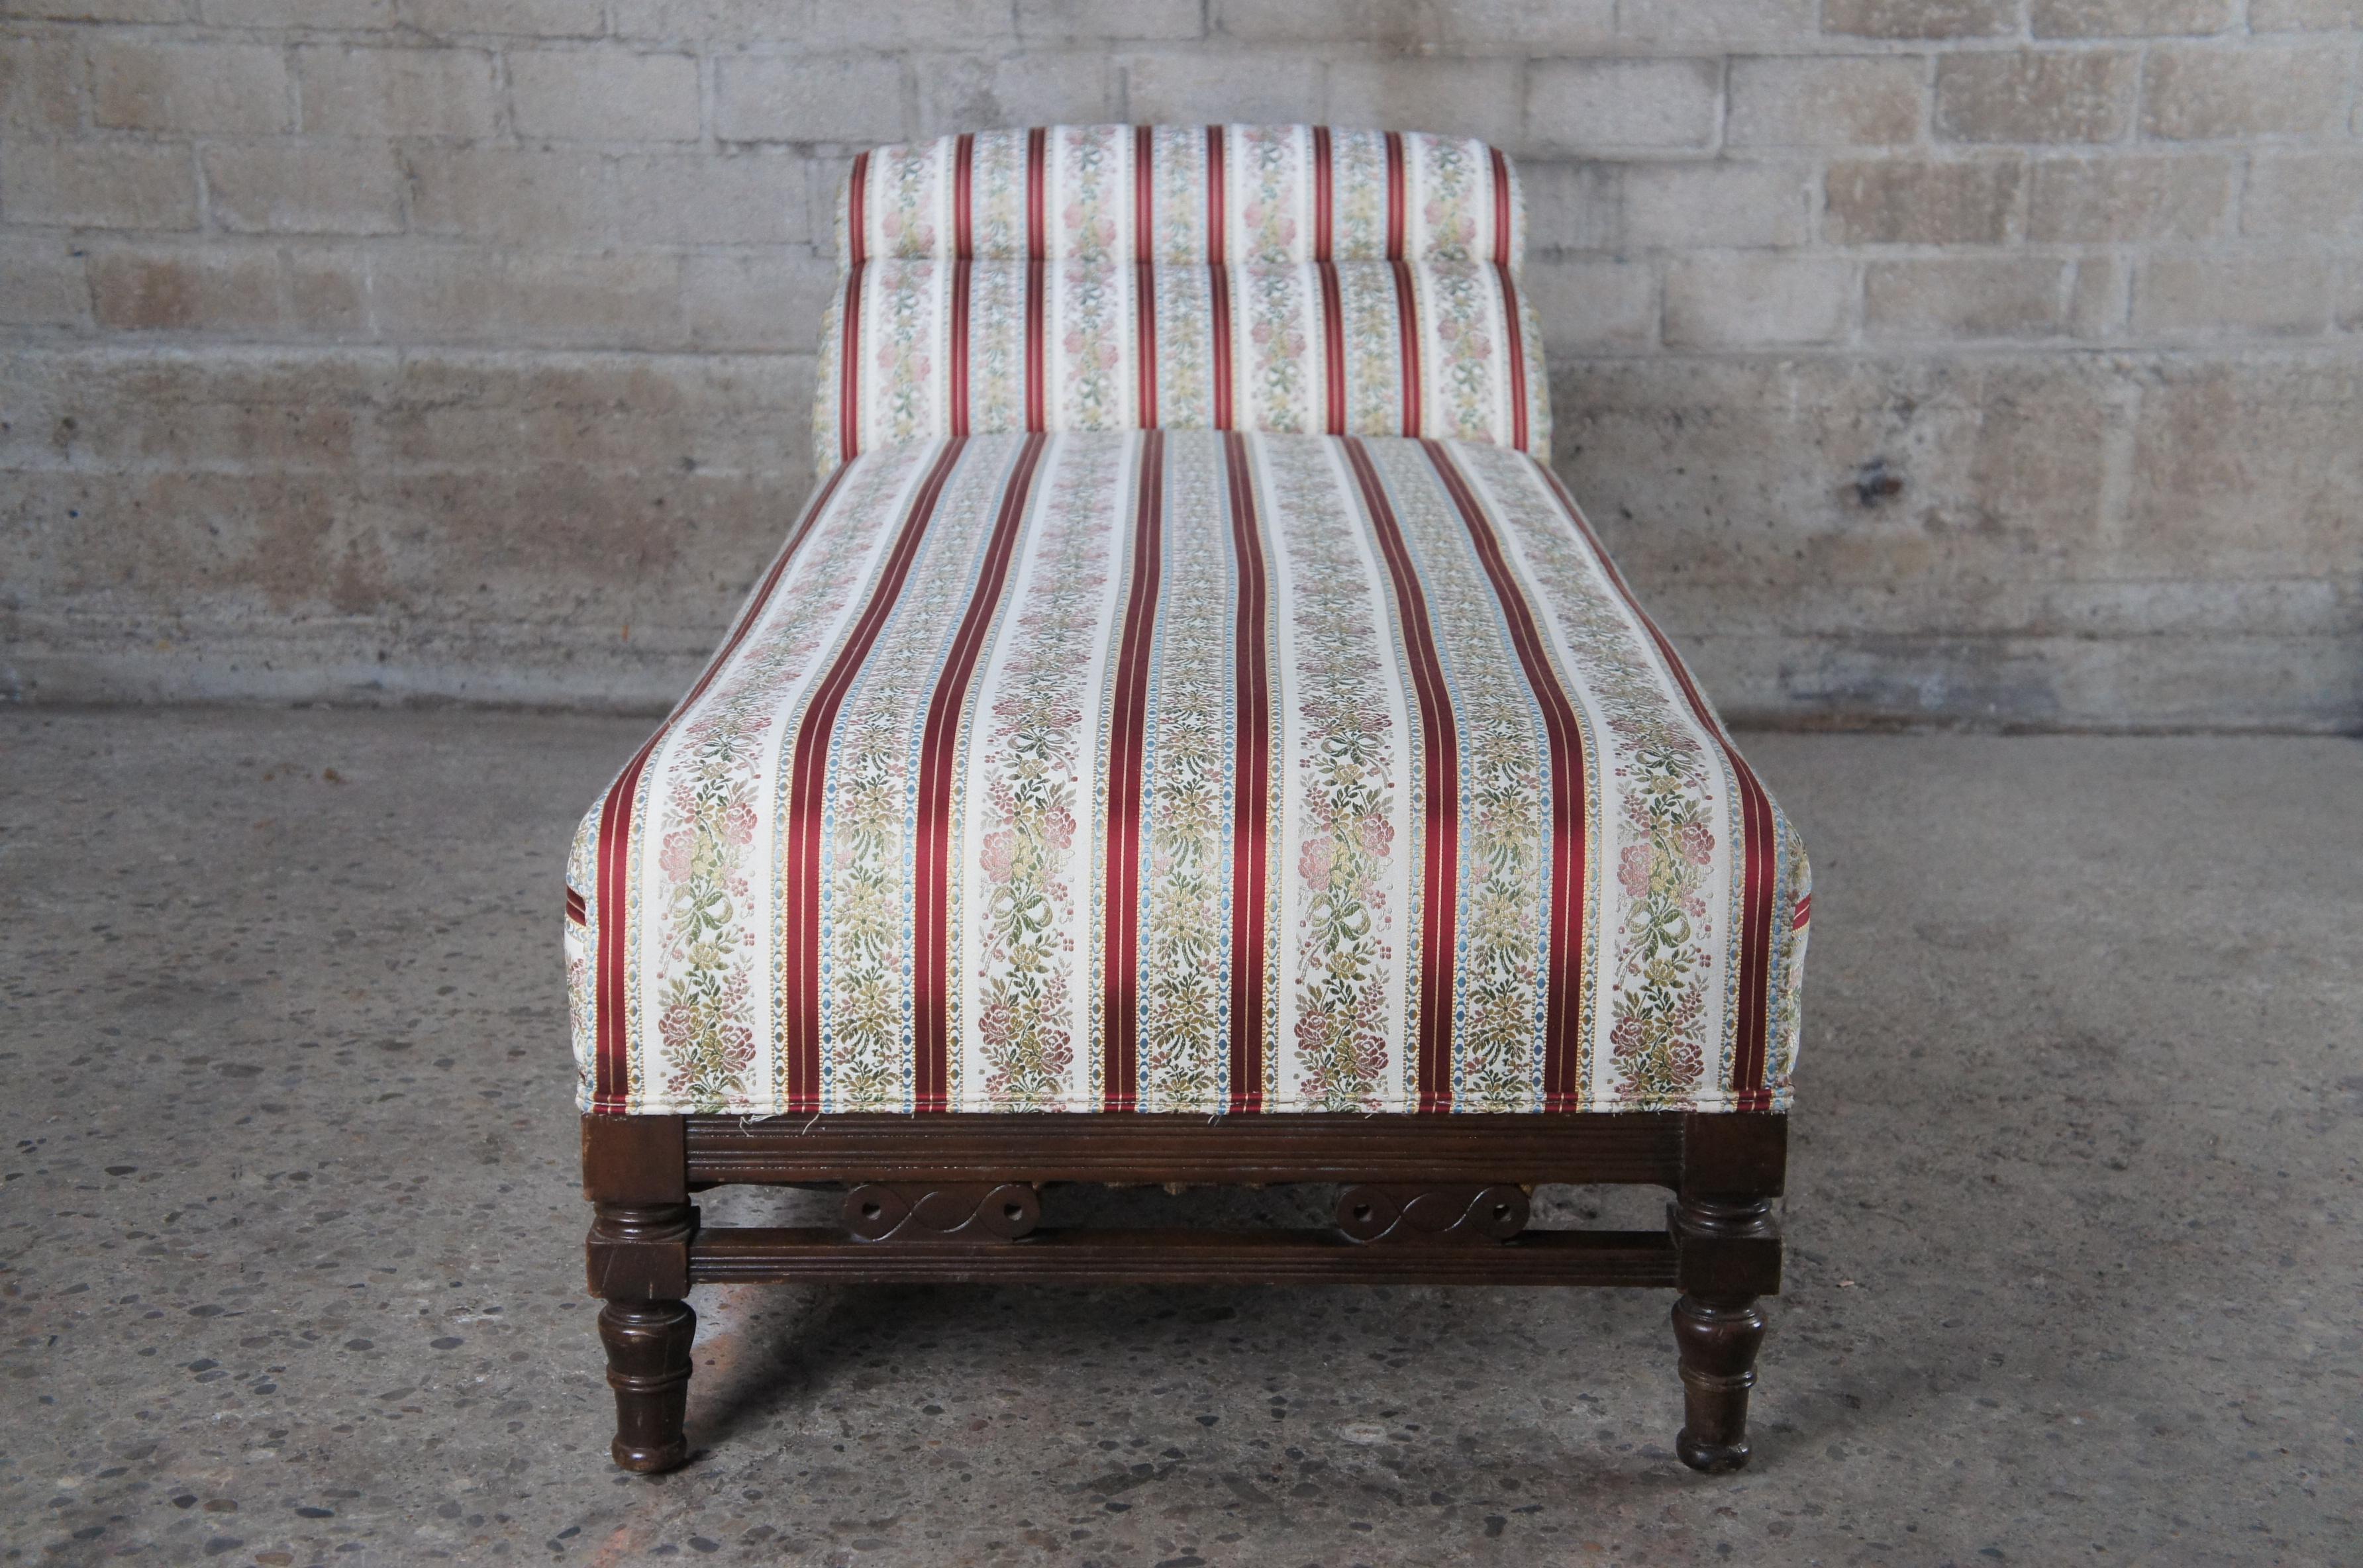 Antique Victorian Eastlake Mahogany Daybed Chaise Lounge Fainting Couch Recamier In Good Condition For Sale In Dayton, OH